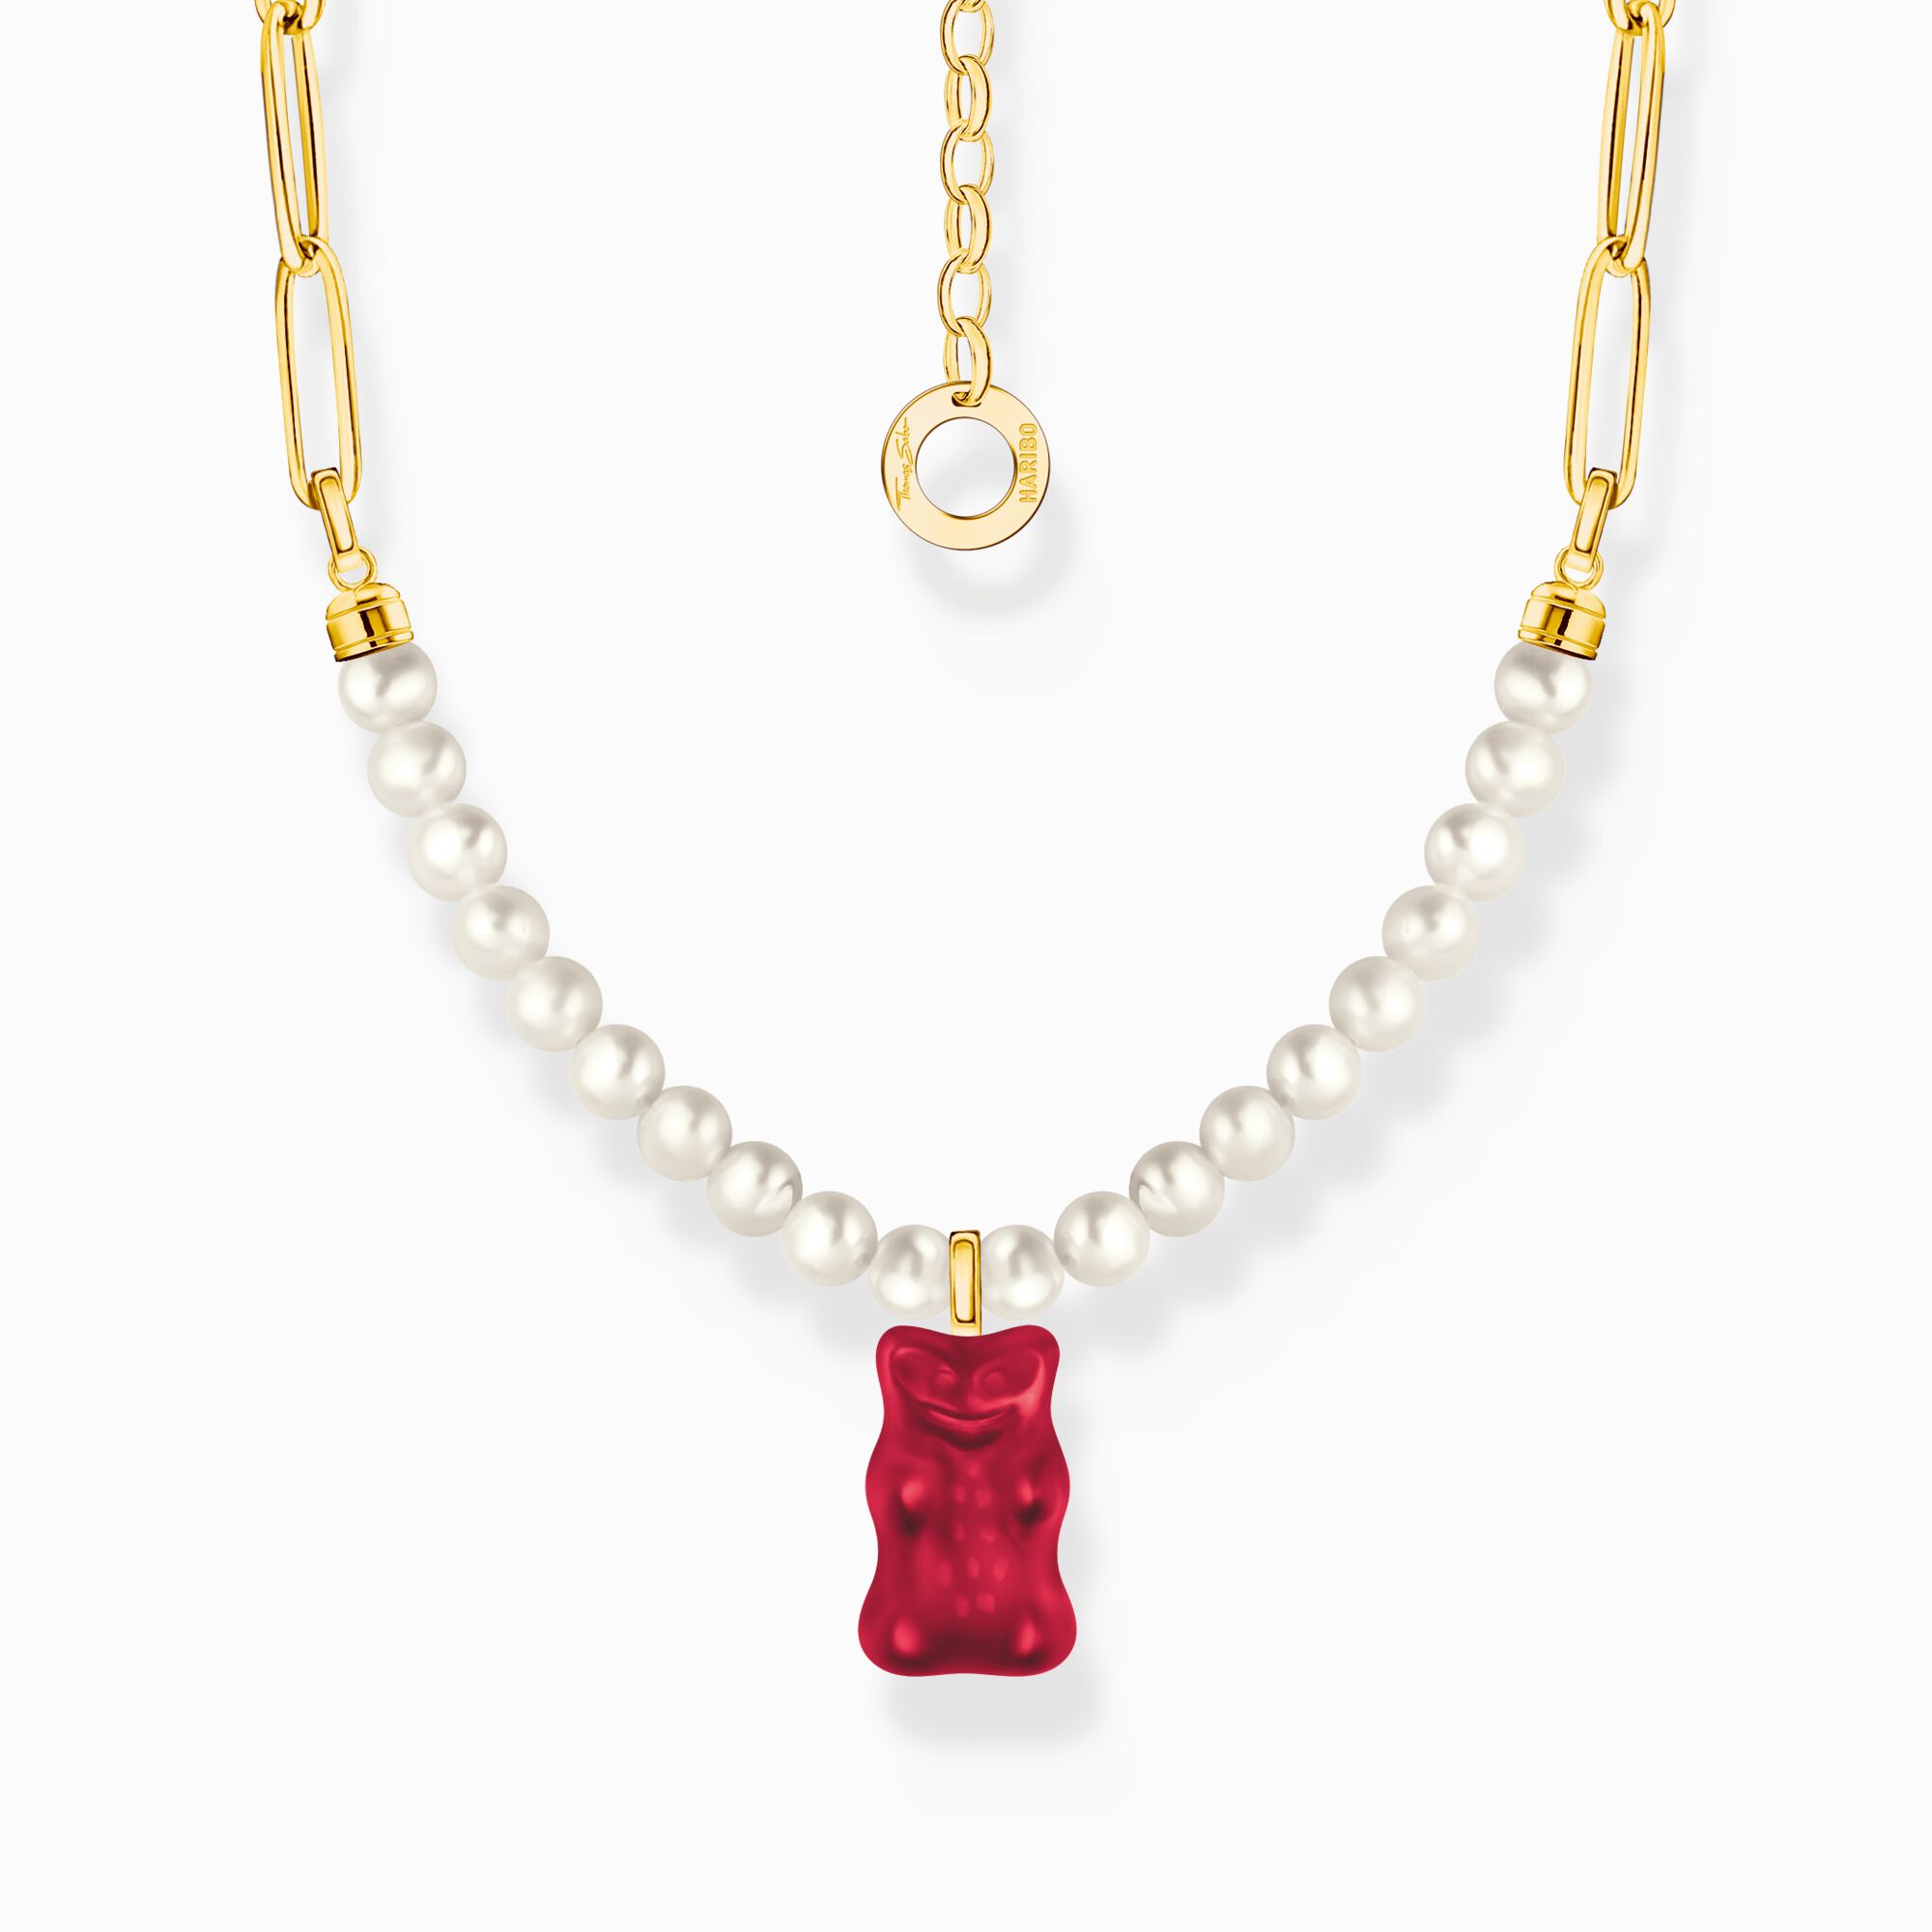 Gold-plated link necklace with red goldbears &amp; freshwater pearls from the Charming Collection collection in the THOMAS SABO online store